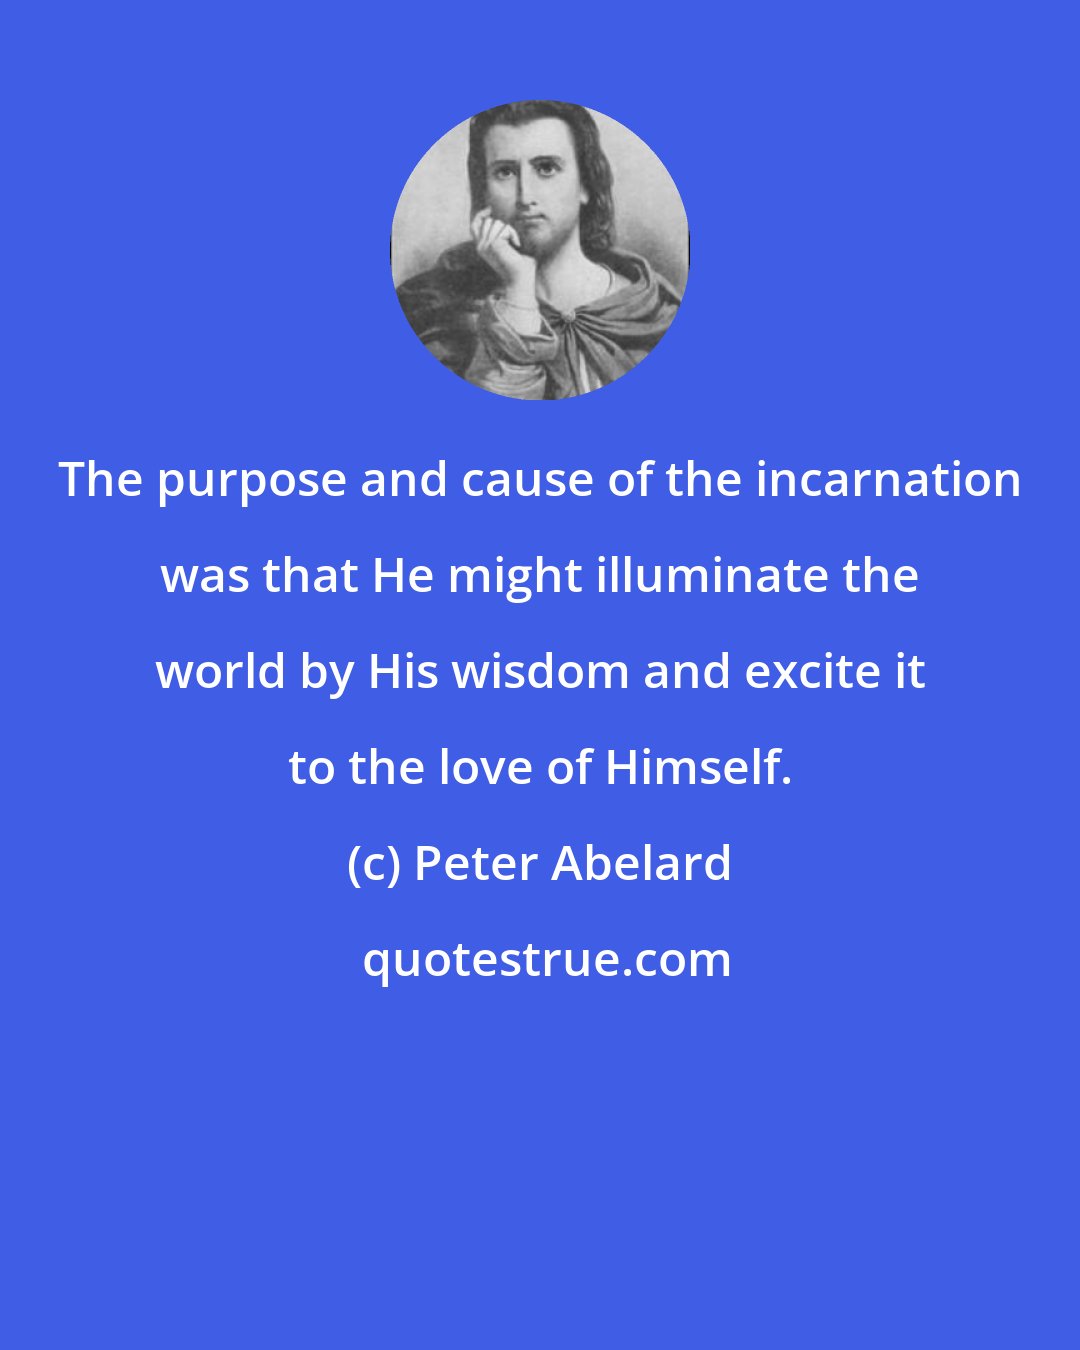 Peter Abelard: The purpose and cause of the incarnation was that He might illuminate the world by His wisdom and excite it to the love of Himself.